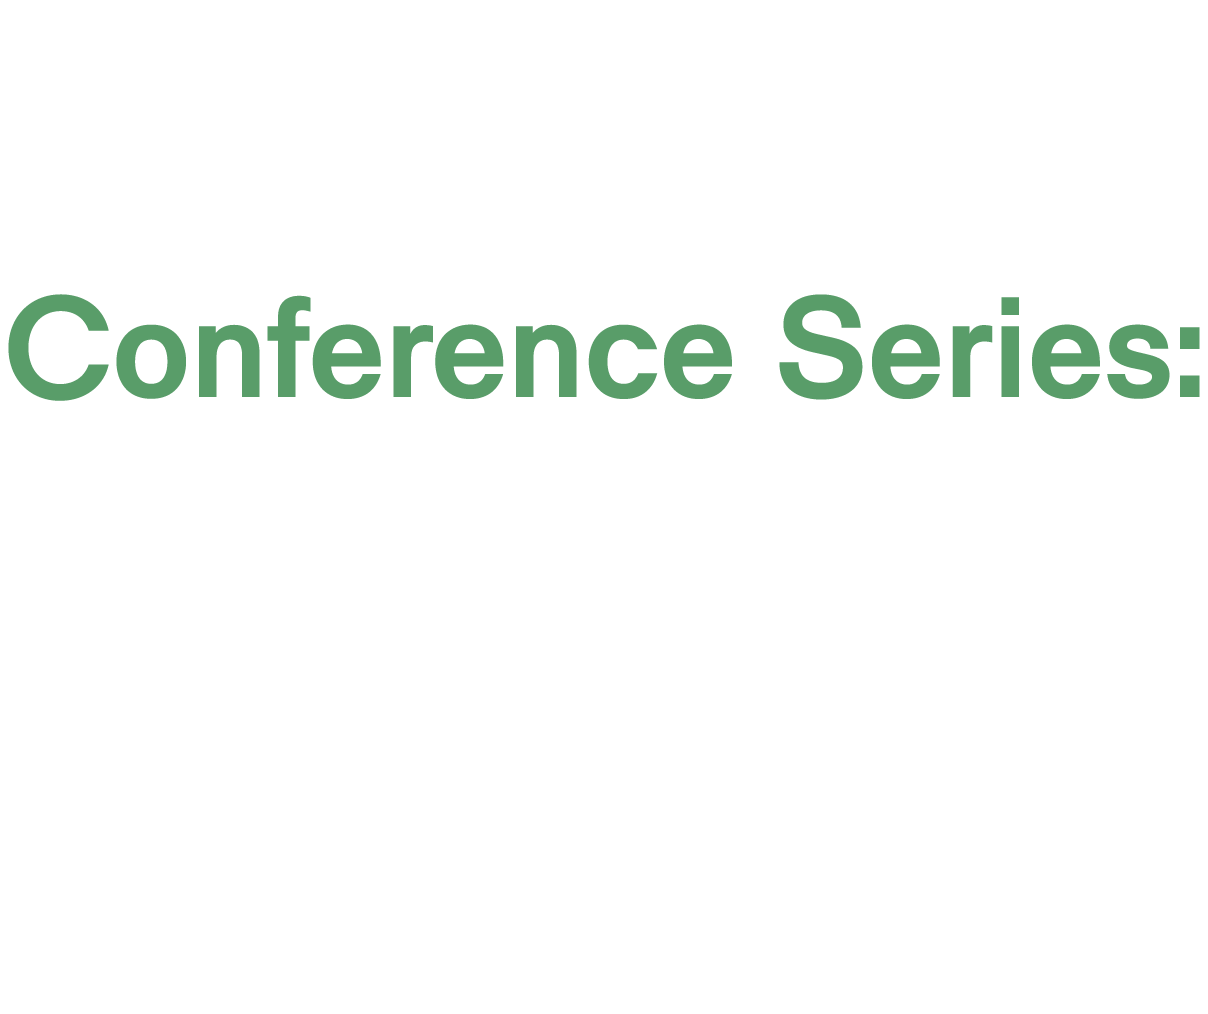 Conference Series: Urban Revival